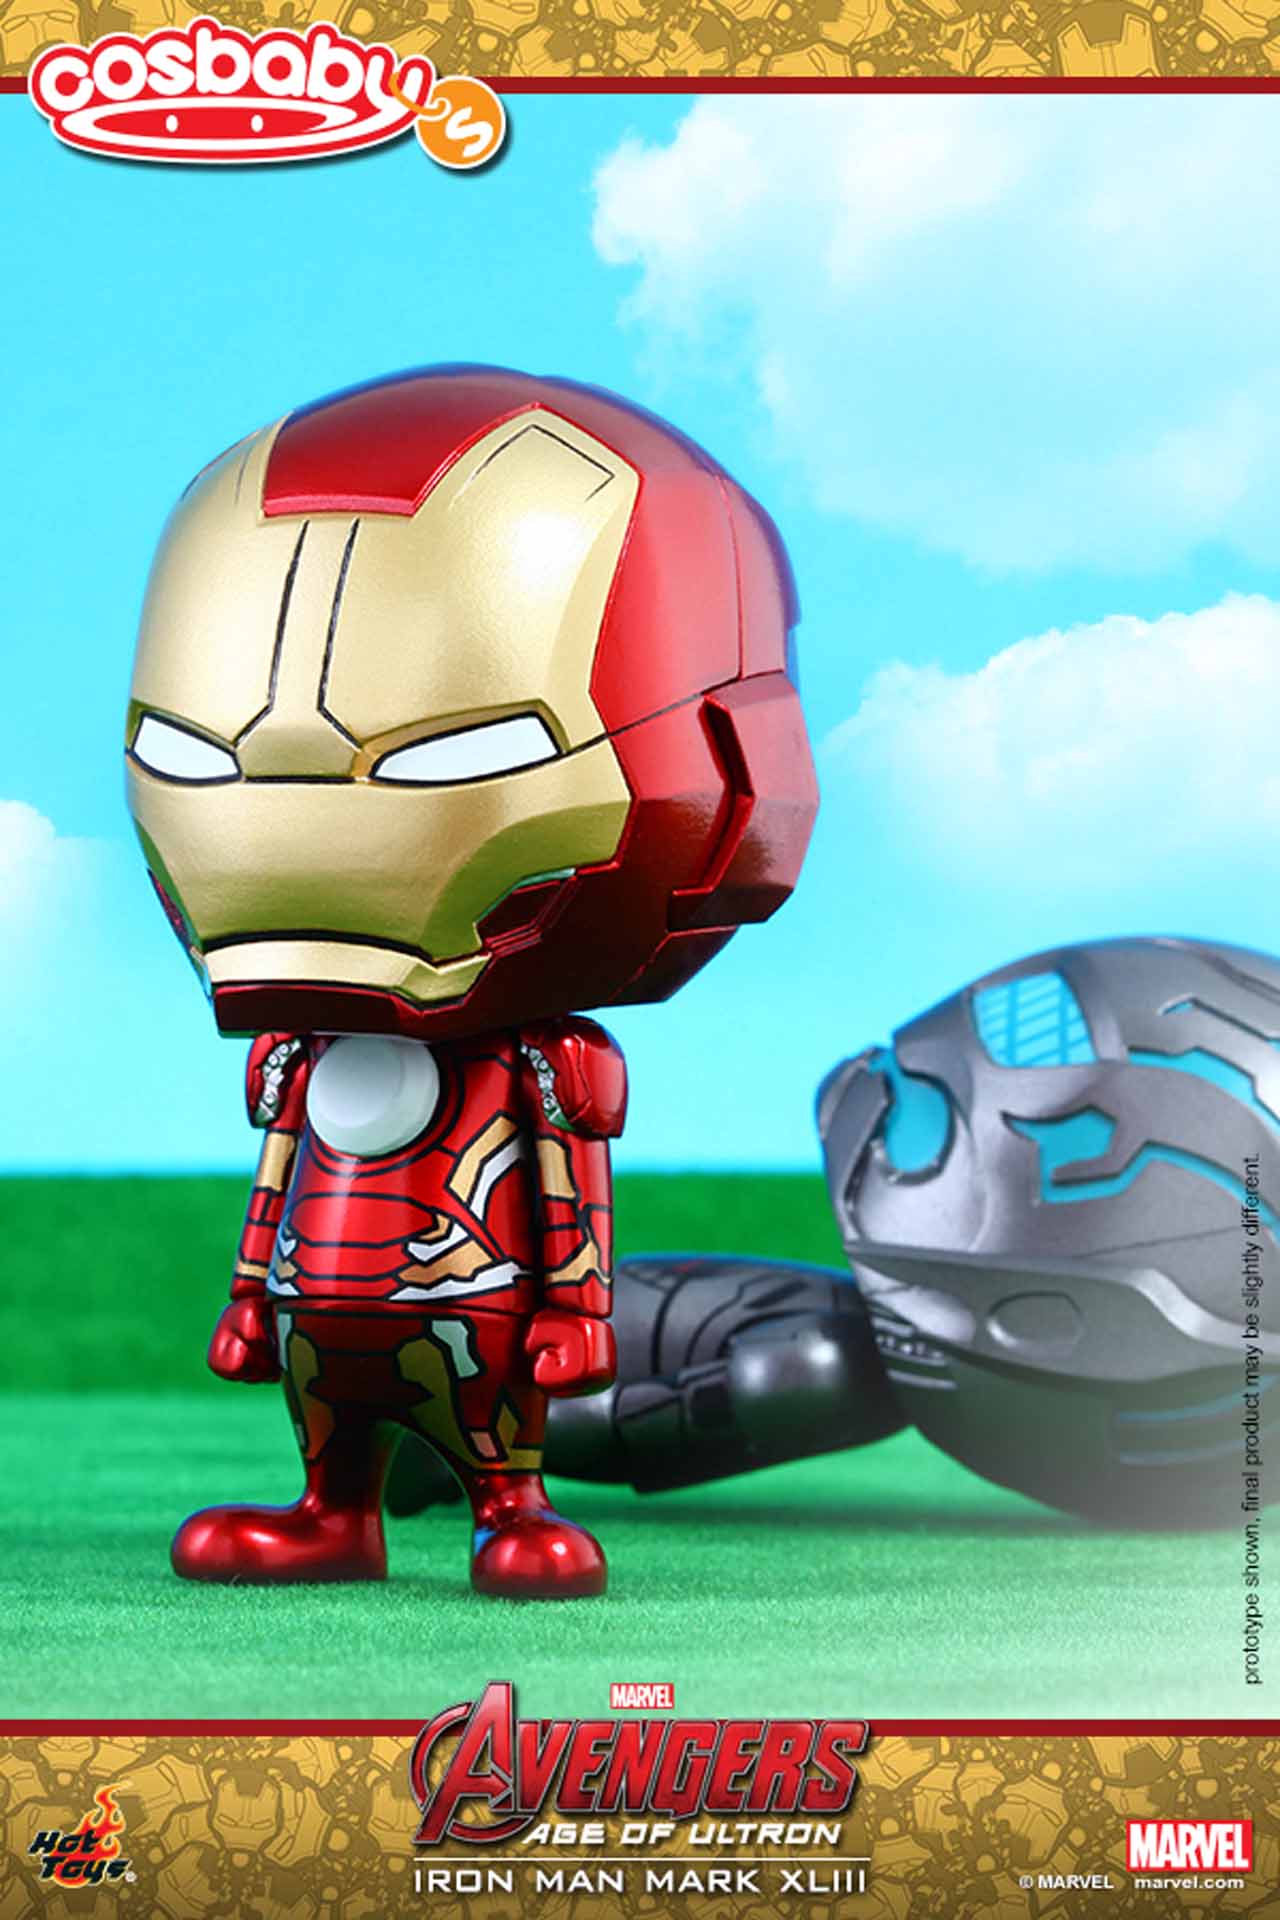 Avengers: Age of Ultron Cosbaby (S) Series 1